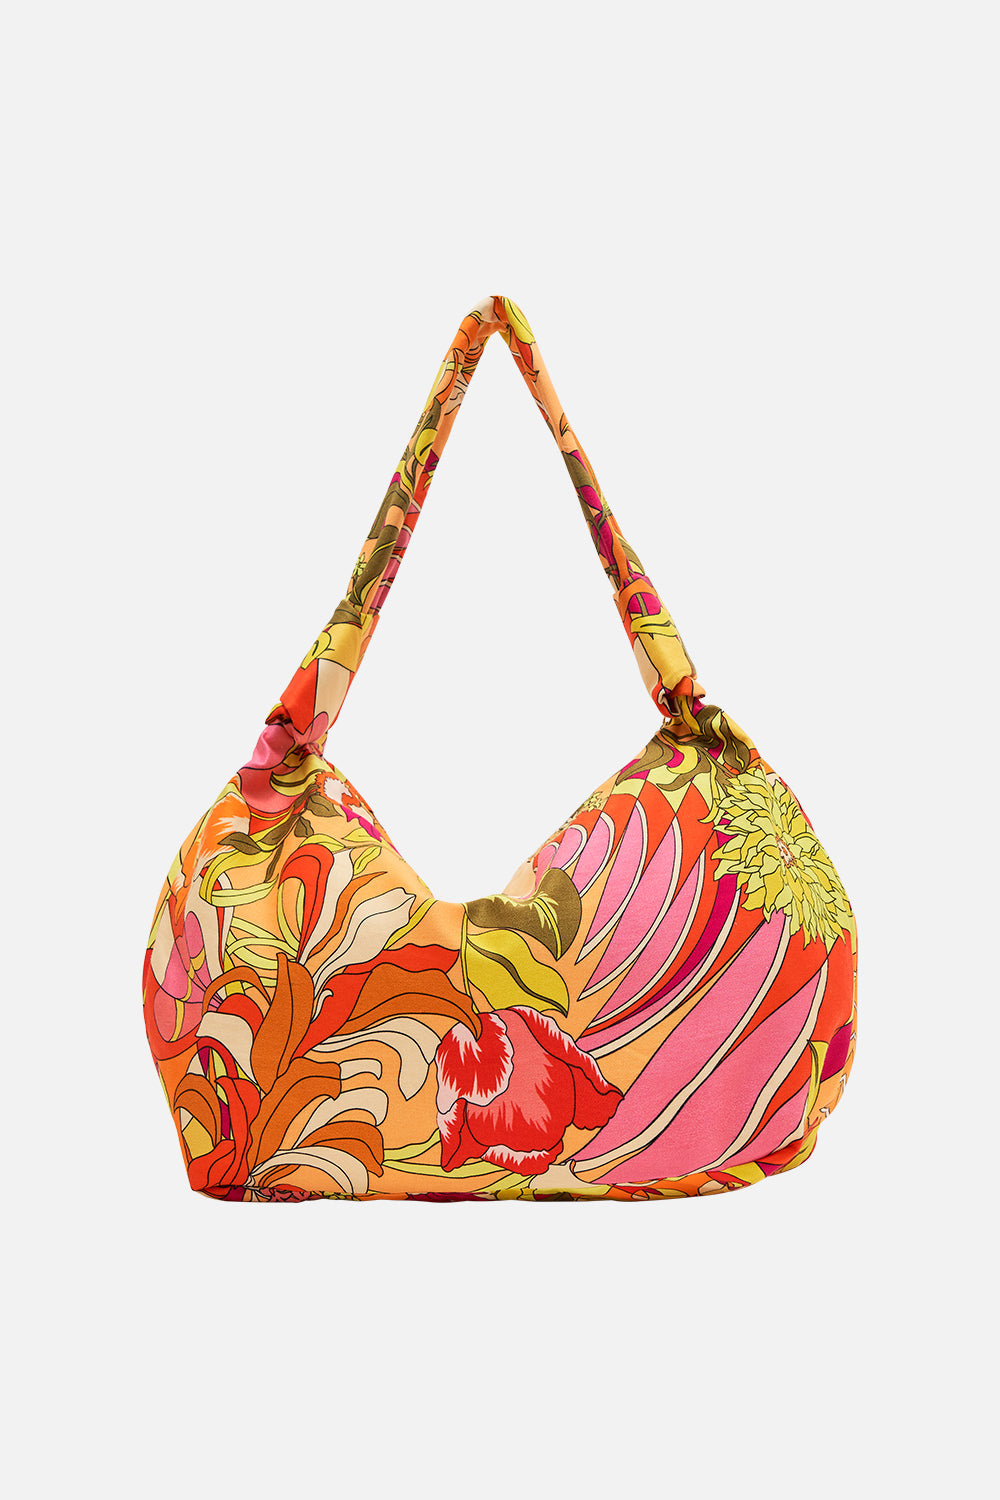 CAMILLA floral slouch shoulder bag in The Flower Child Society